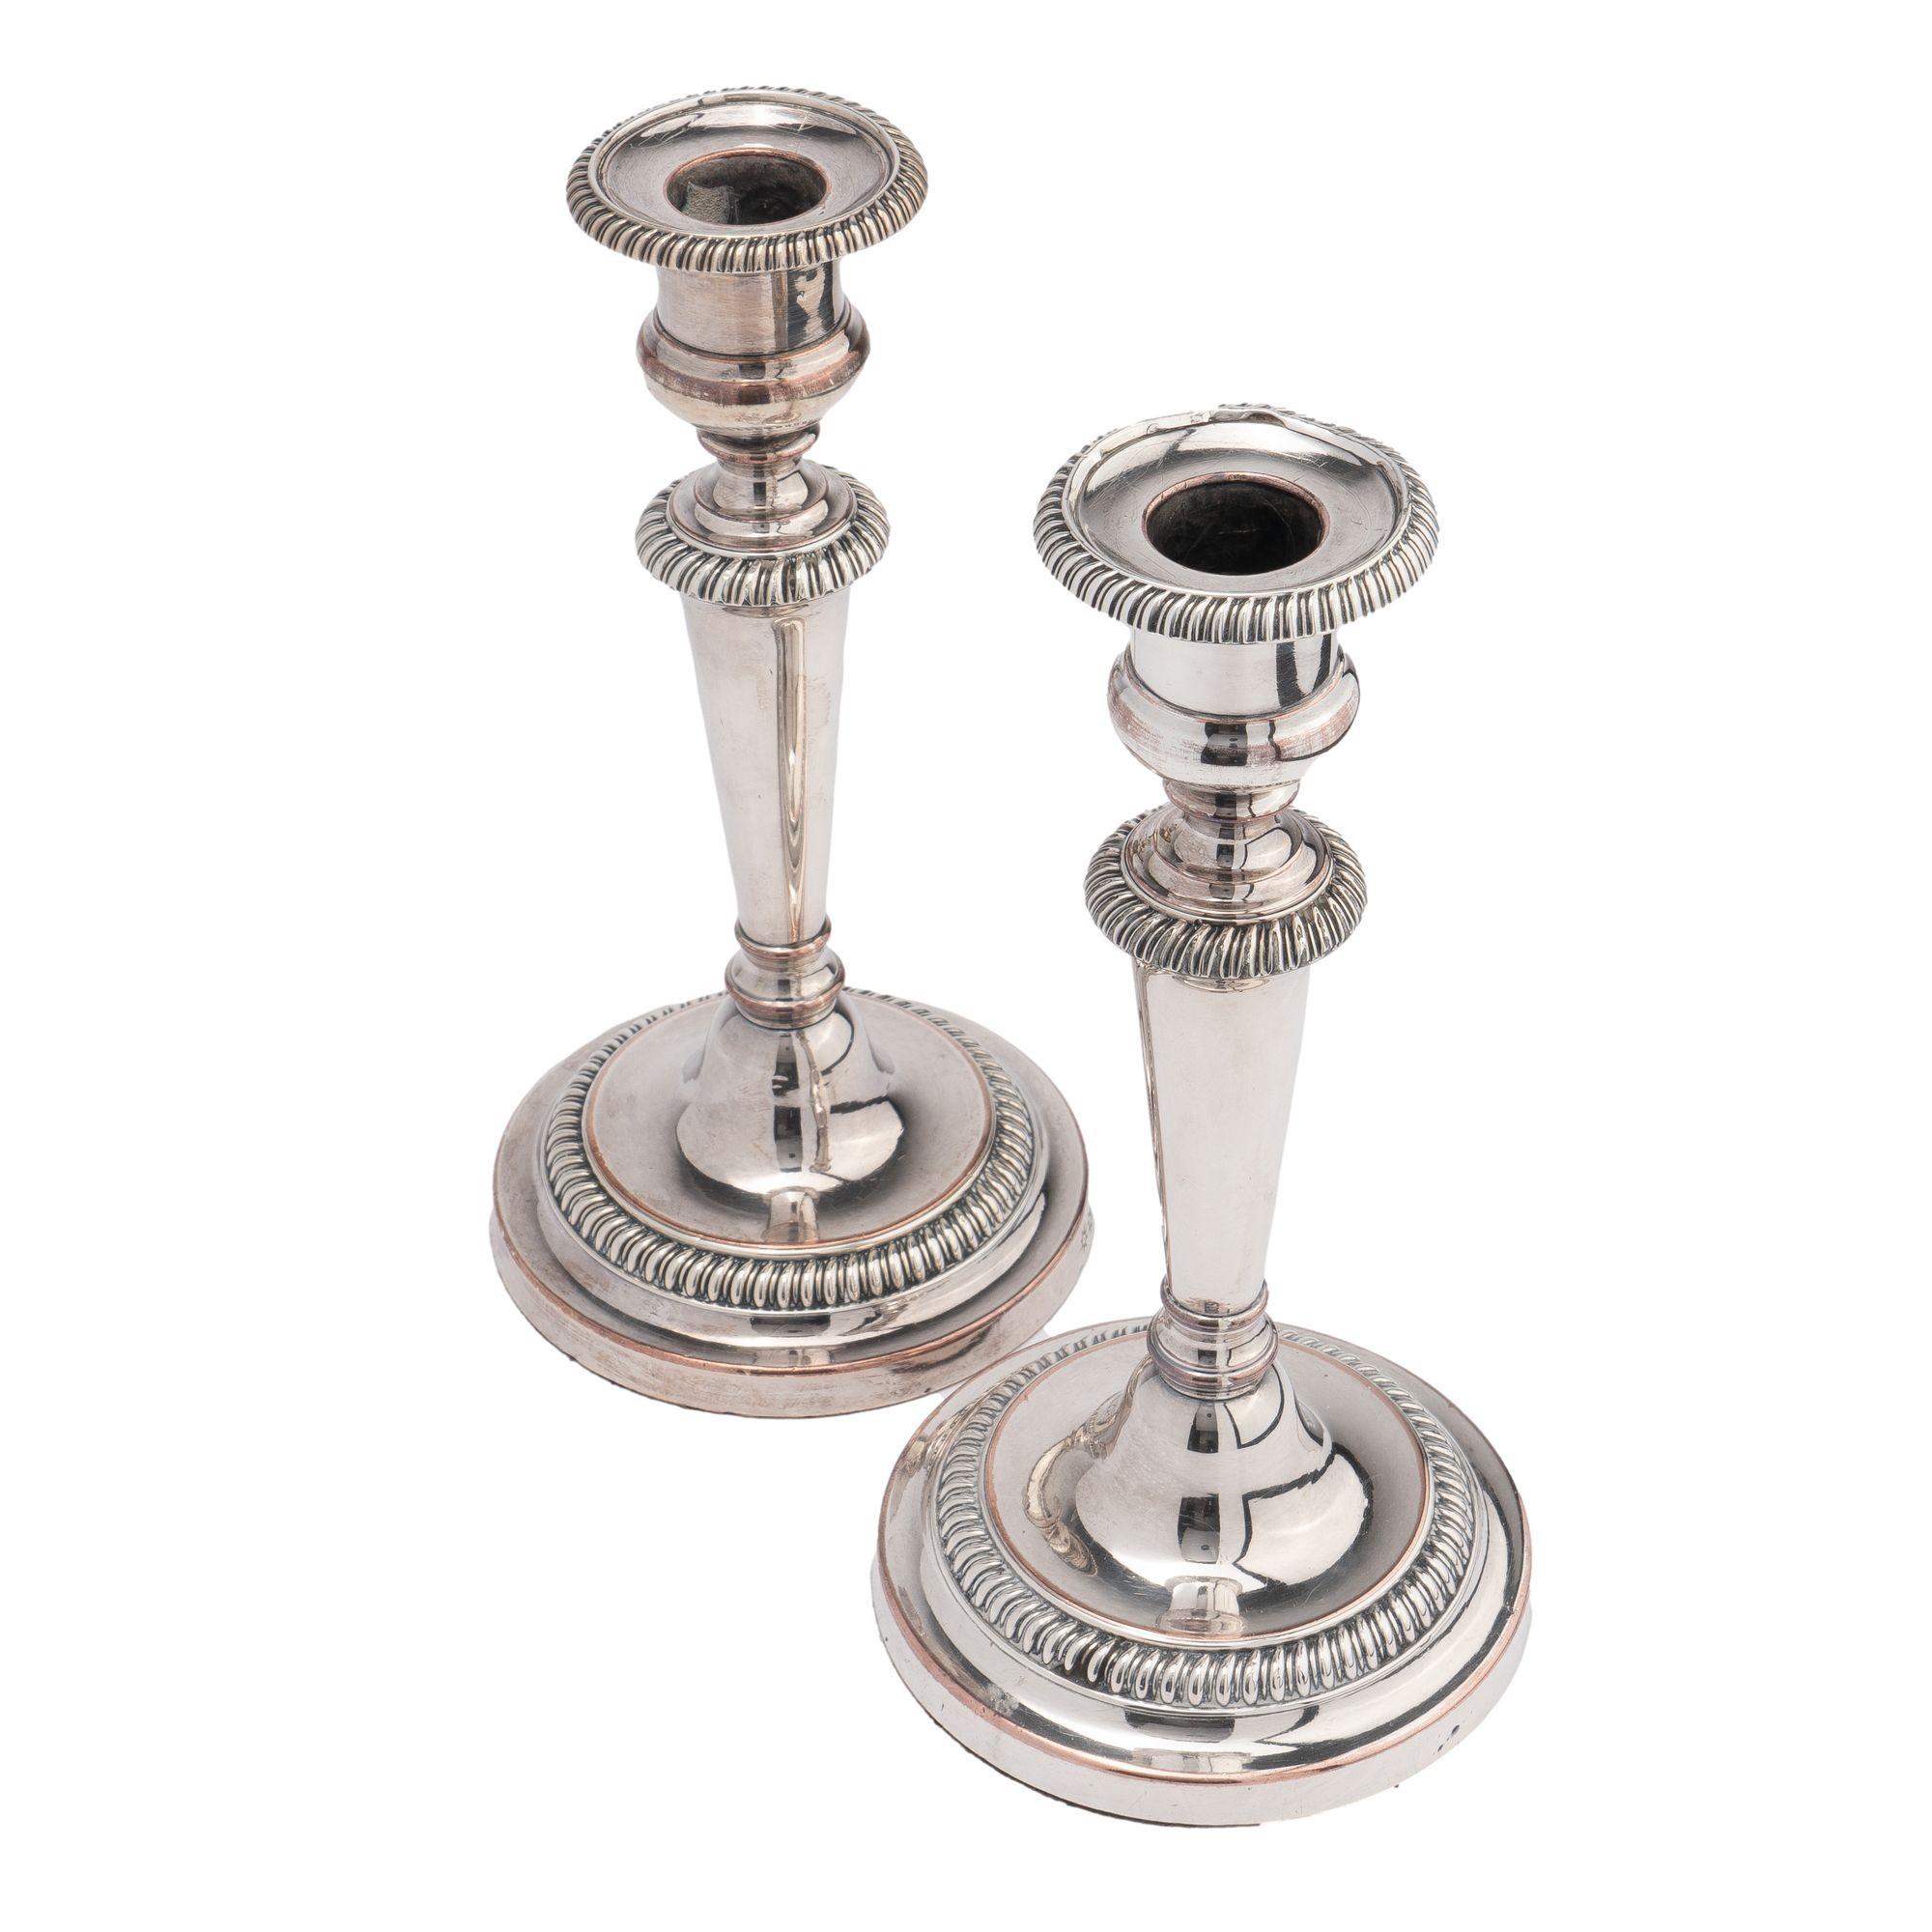 Pair of Matthew Bolton Sheffield candlesticks with a gadrooned bobeshe and base with tapered conical shaft. Both candlesticks feature the makers stamp of two stars on the side of the base.

England, circa 1815.